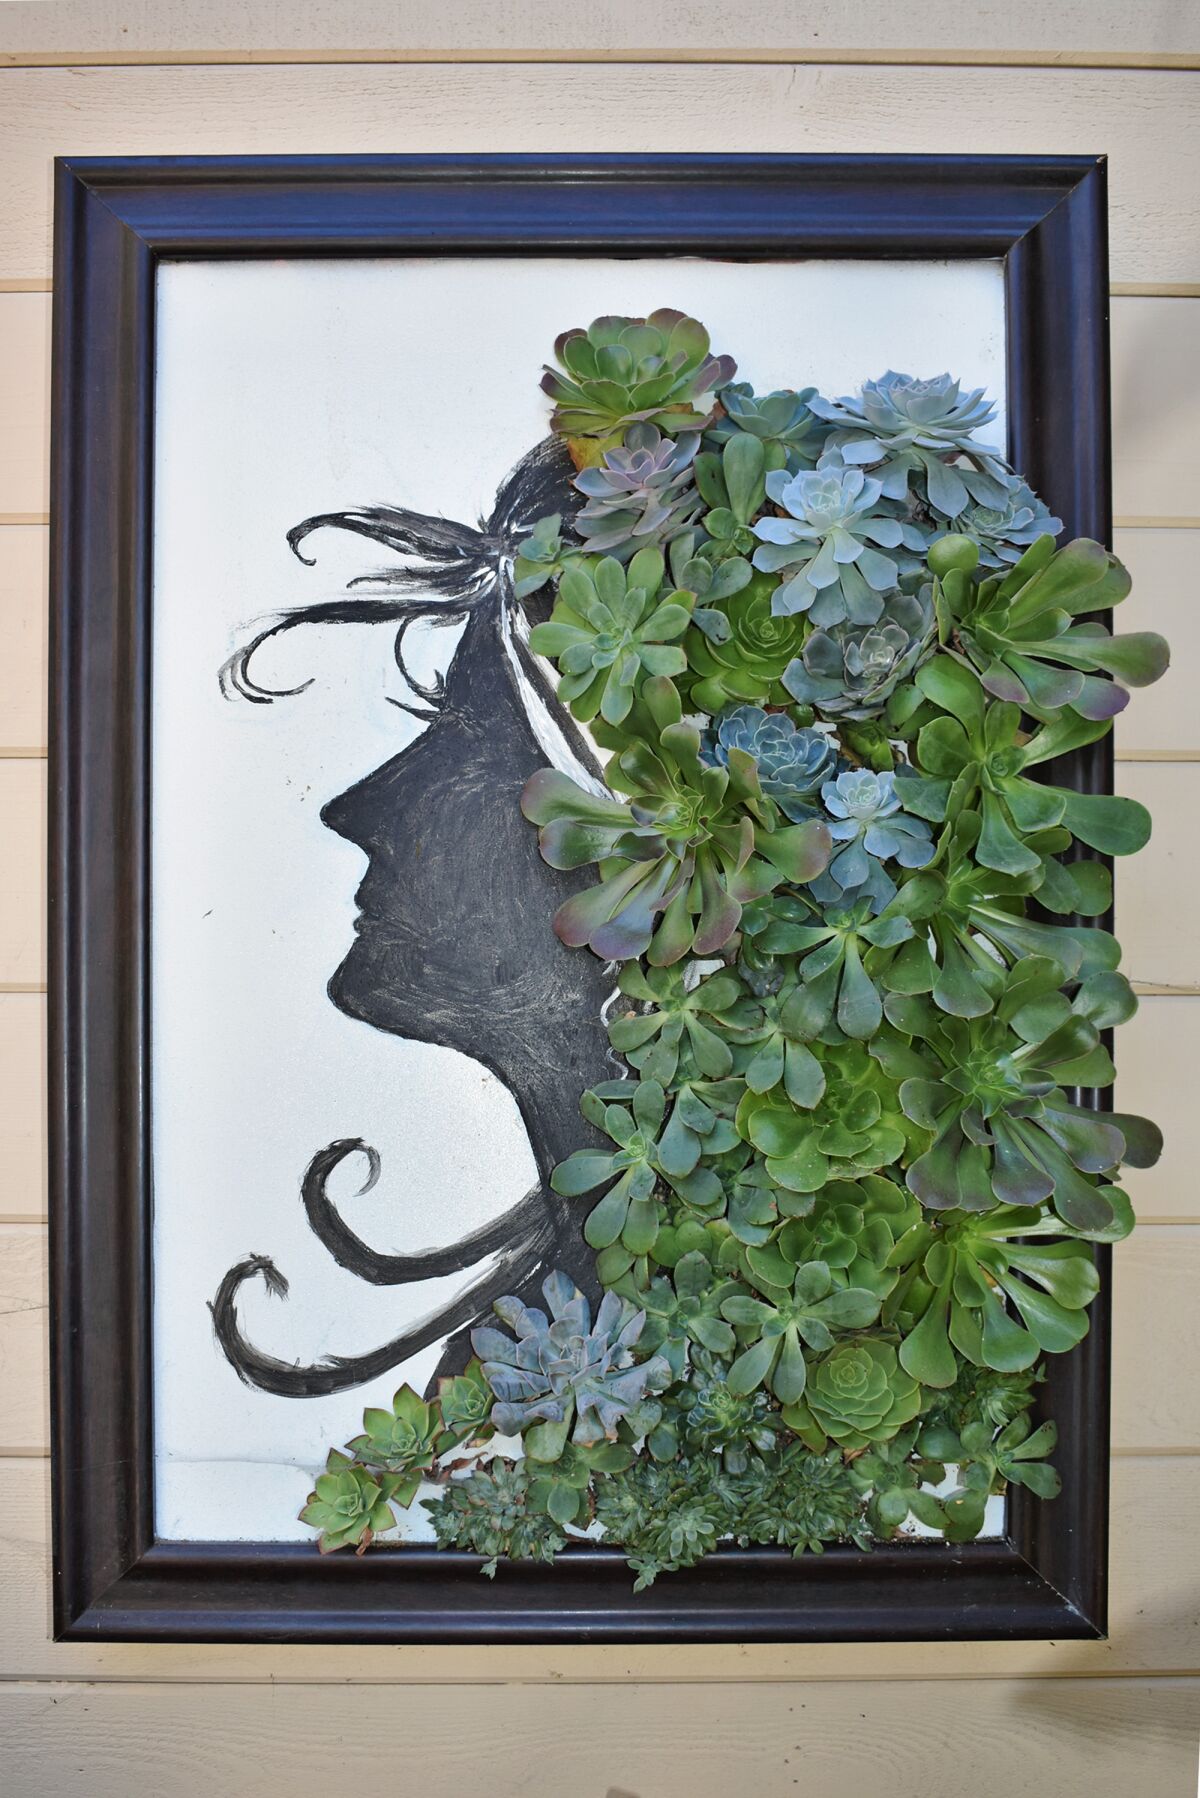 Olive Teodoro decided to create a portrait of a lady, with succulents as her hair. Her husband Arturo made the frame.